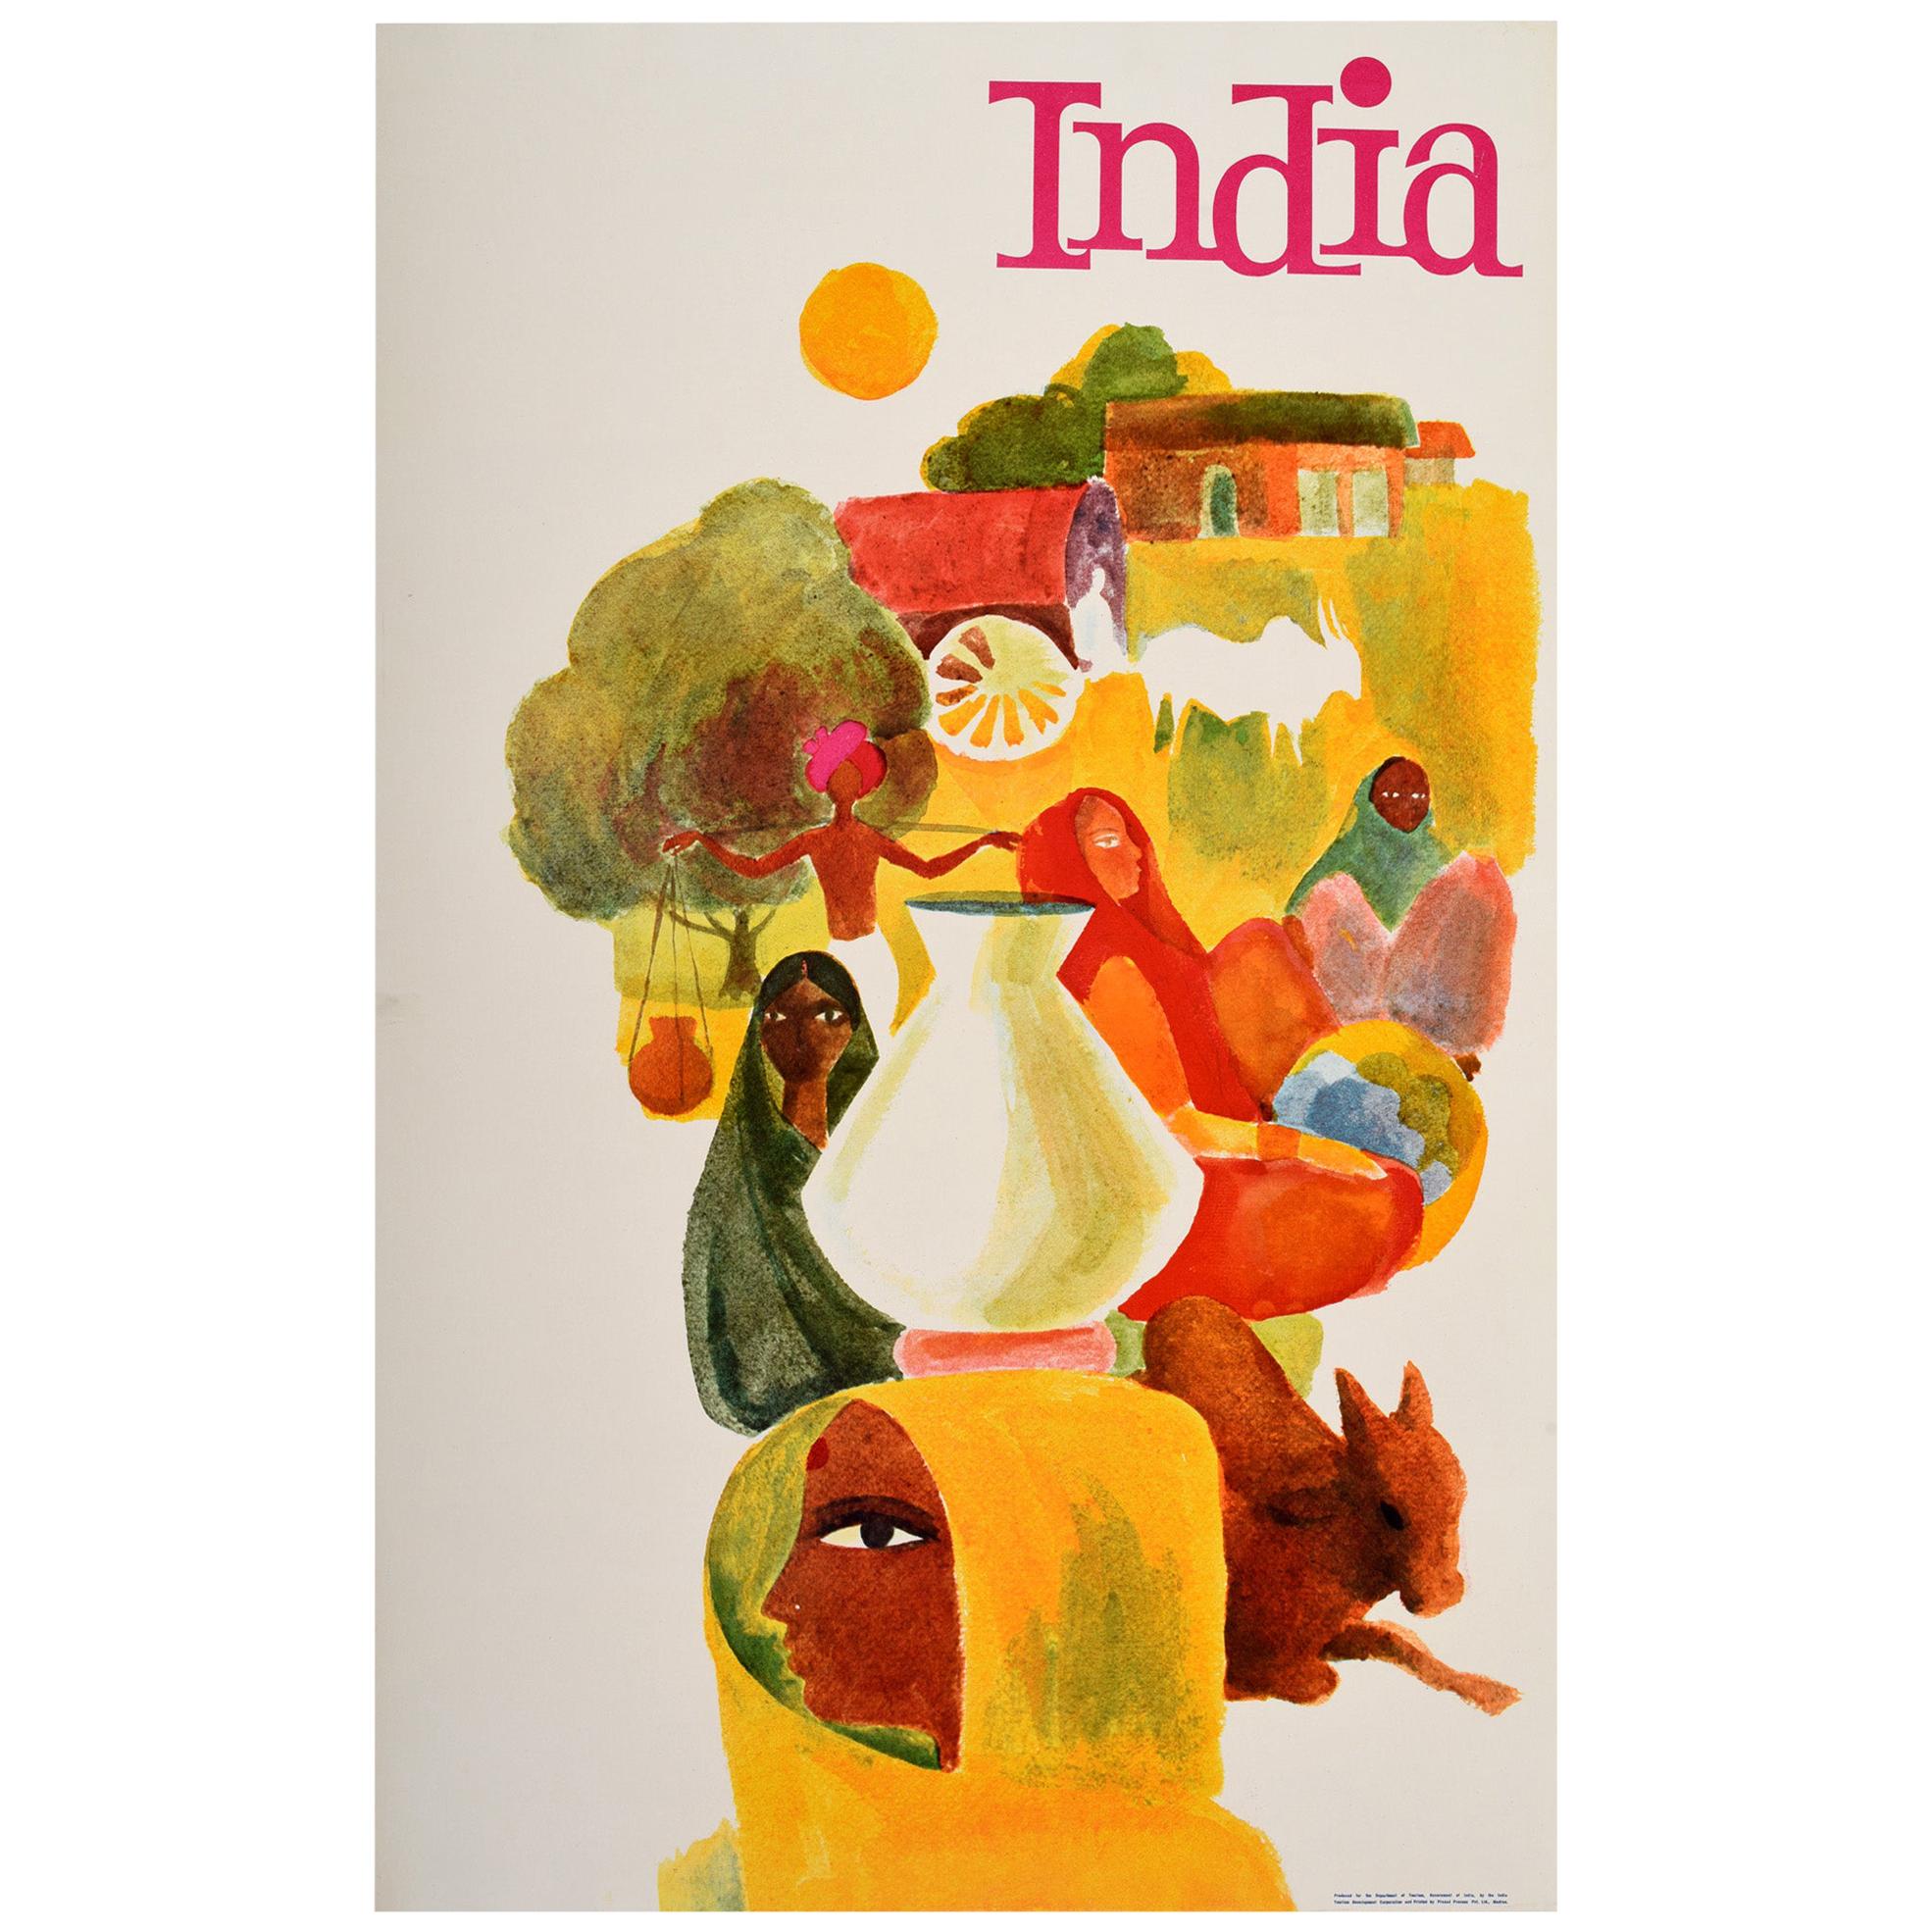 Original Vintage Travel Poster For India Ft. Colourful Illustrations People Cow